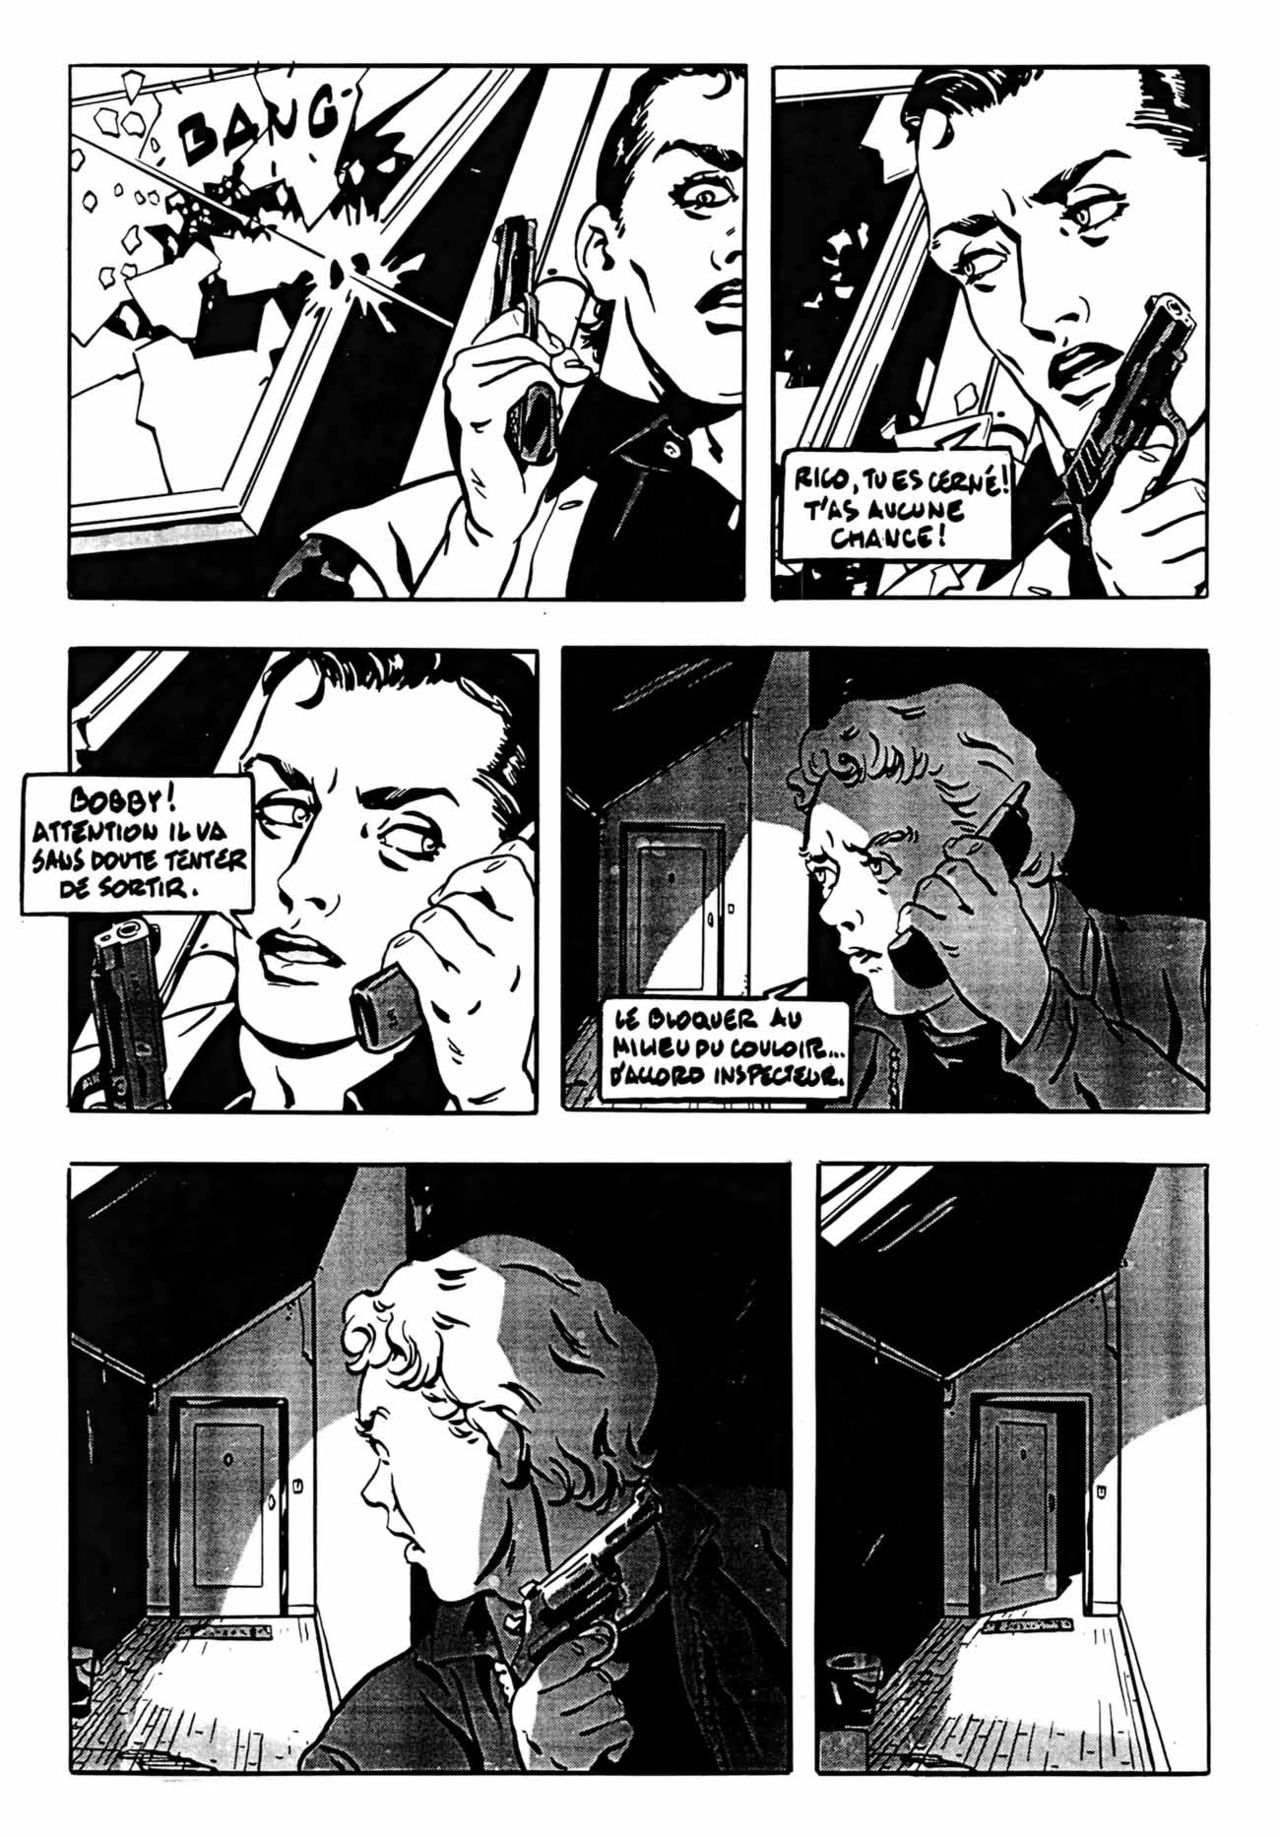 Police By Night - Volume 1 numero d'image 70